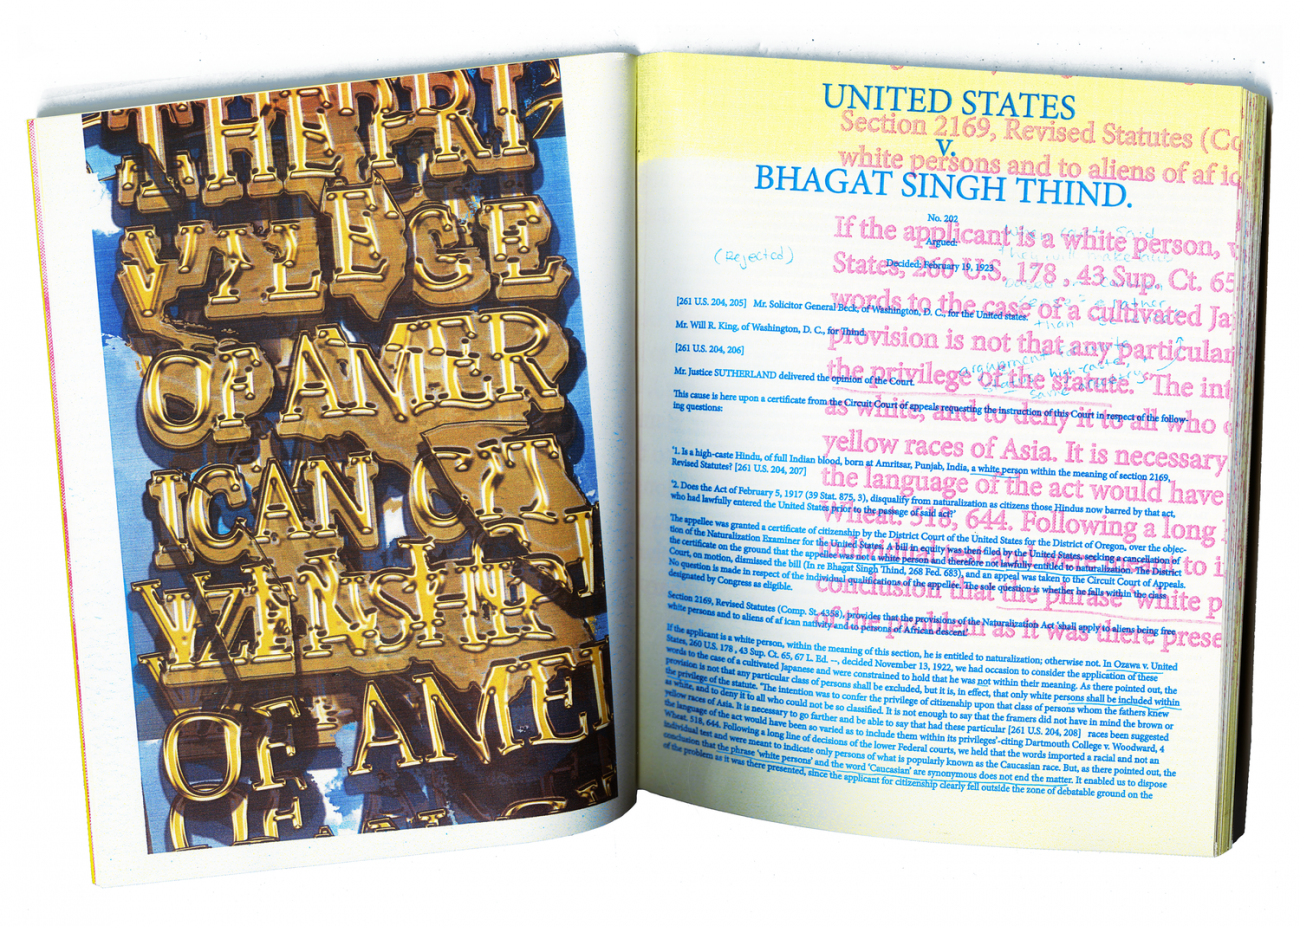 Image detail of artist book made by artist Kimi Hanauer showing the book lying open. The right hand page is collaged image of broken text. The left hand side is a collage of text prominently featuring the first page of a legal document from The United States v. Bhagat Singh Thind.  